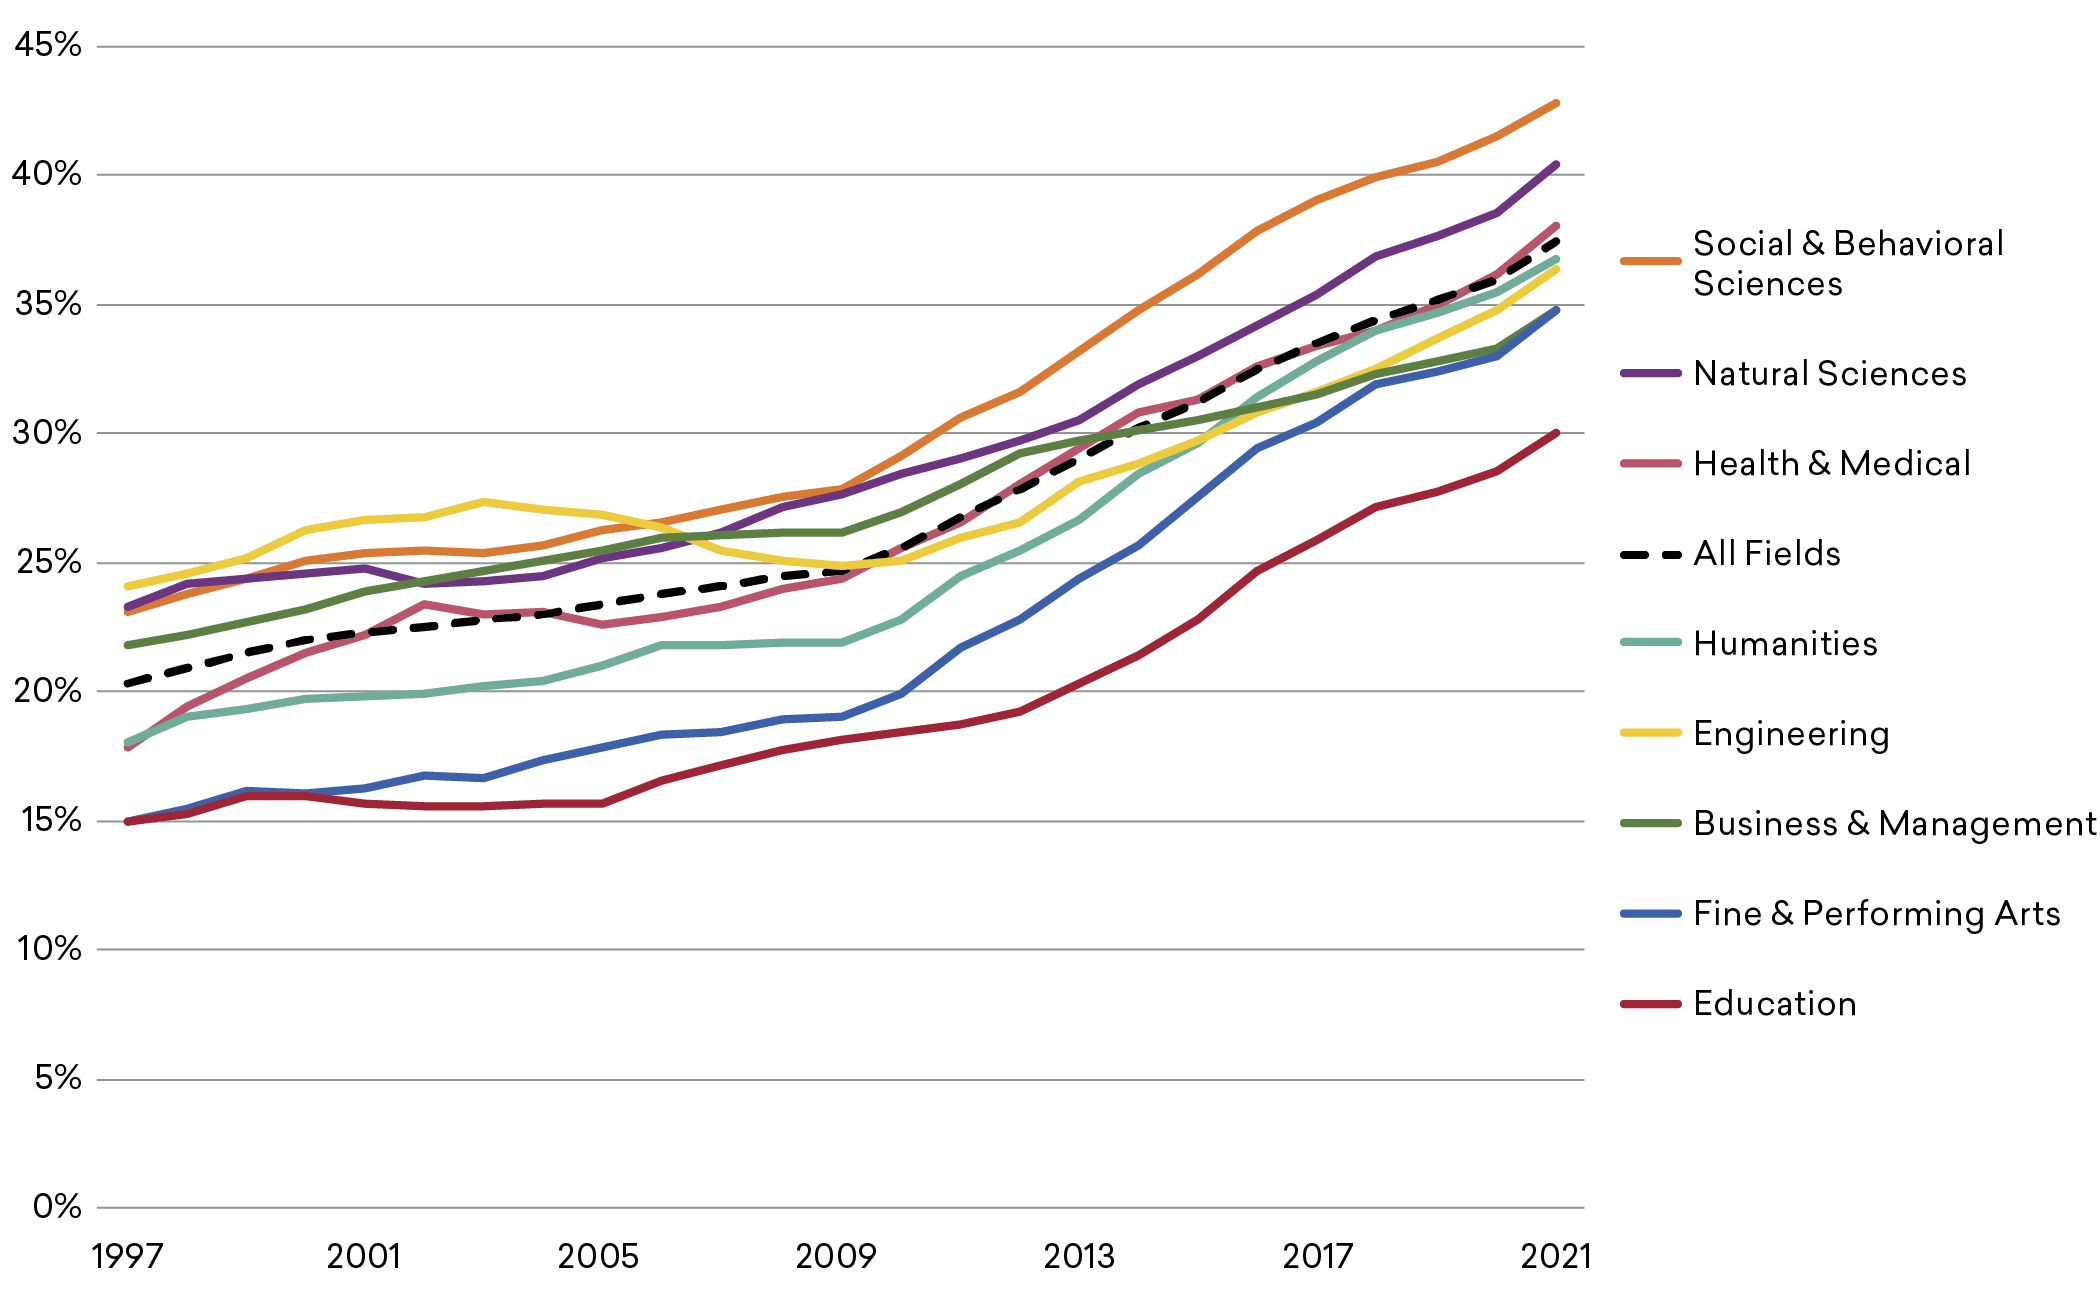 Figure 2: A line chart shows the change in completed Bachelor’s degrees 1997-2021, focusing solely on degrees awarded to students from traditionally underrepresented racial/ethnic groups. All majors show an upward trajectory.